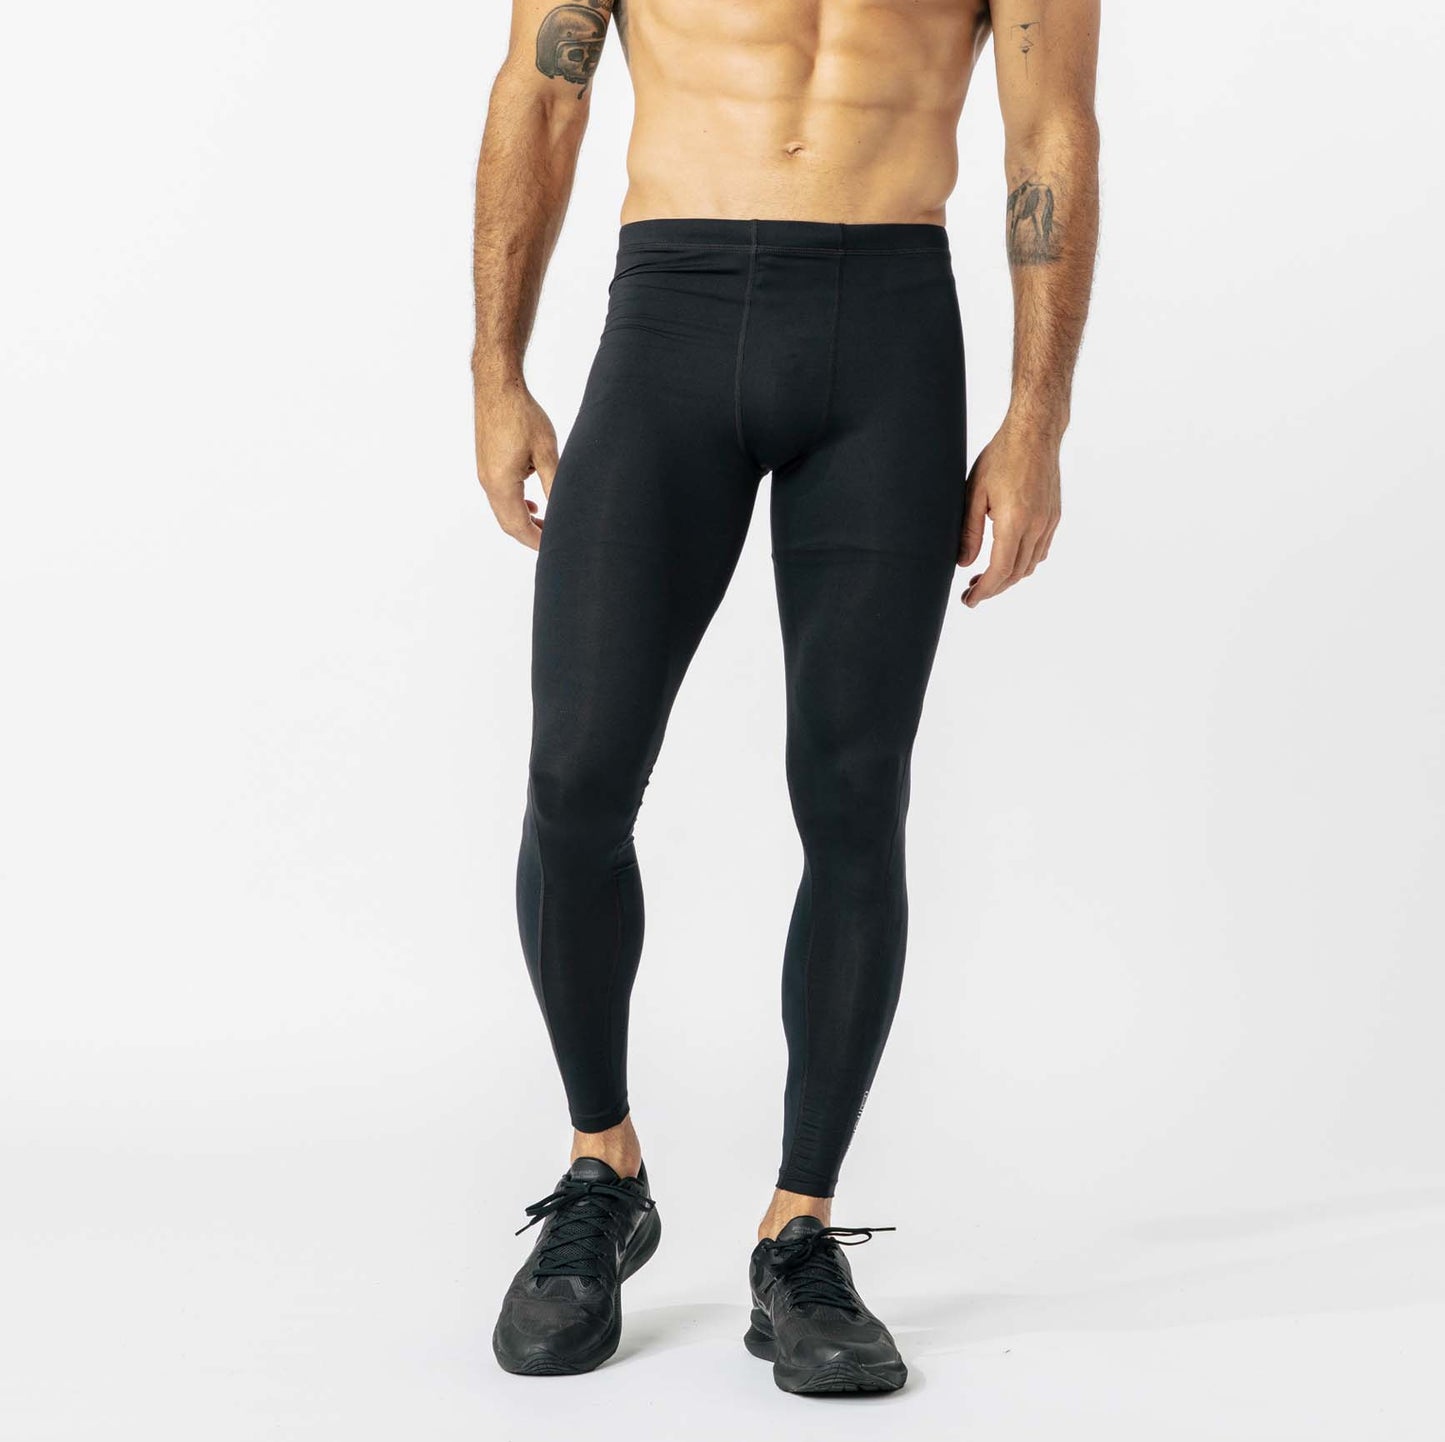  Mens Thermal Compression Pants, Athletic Sports